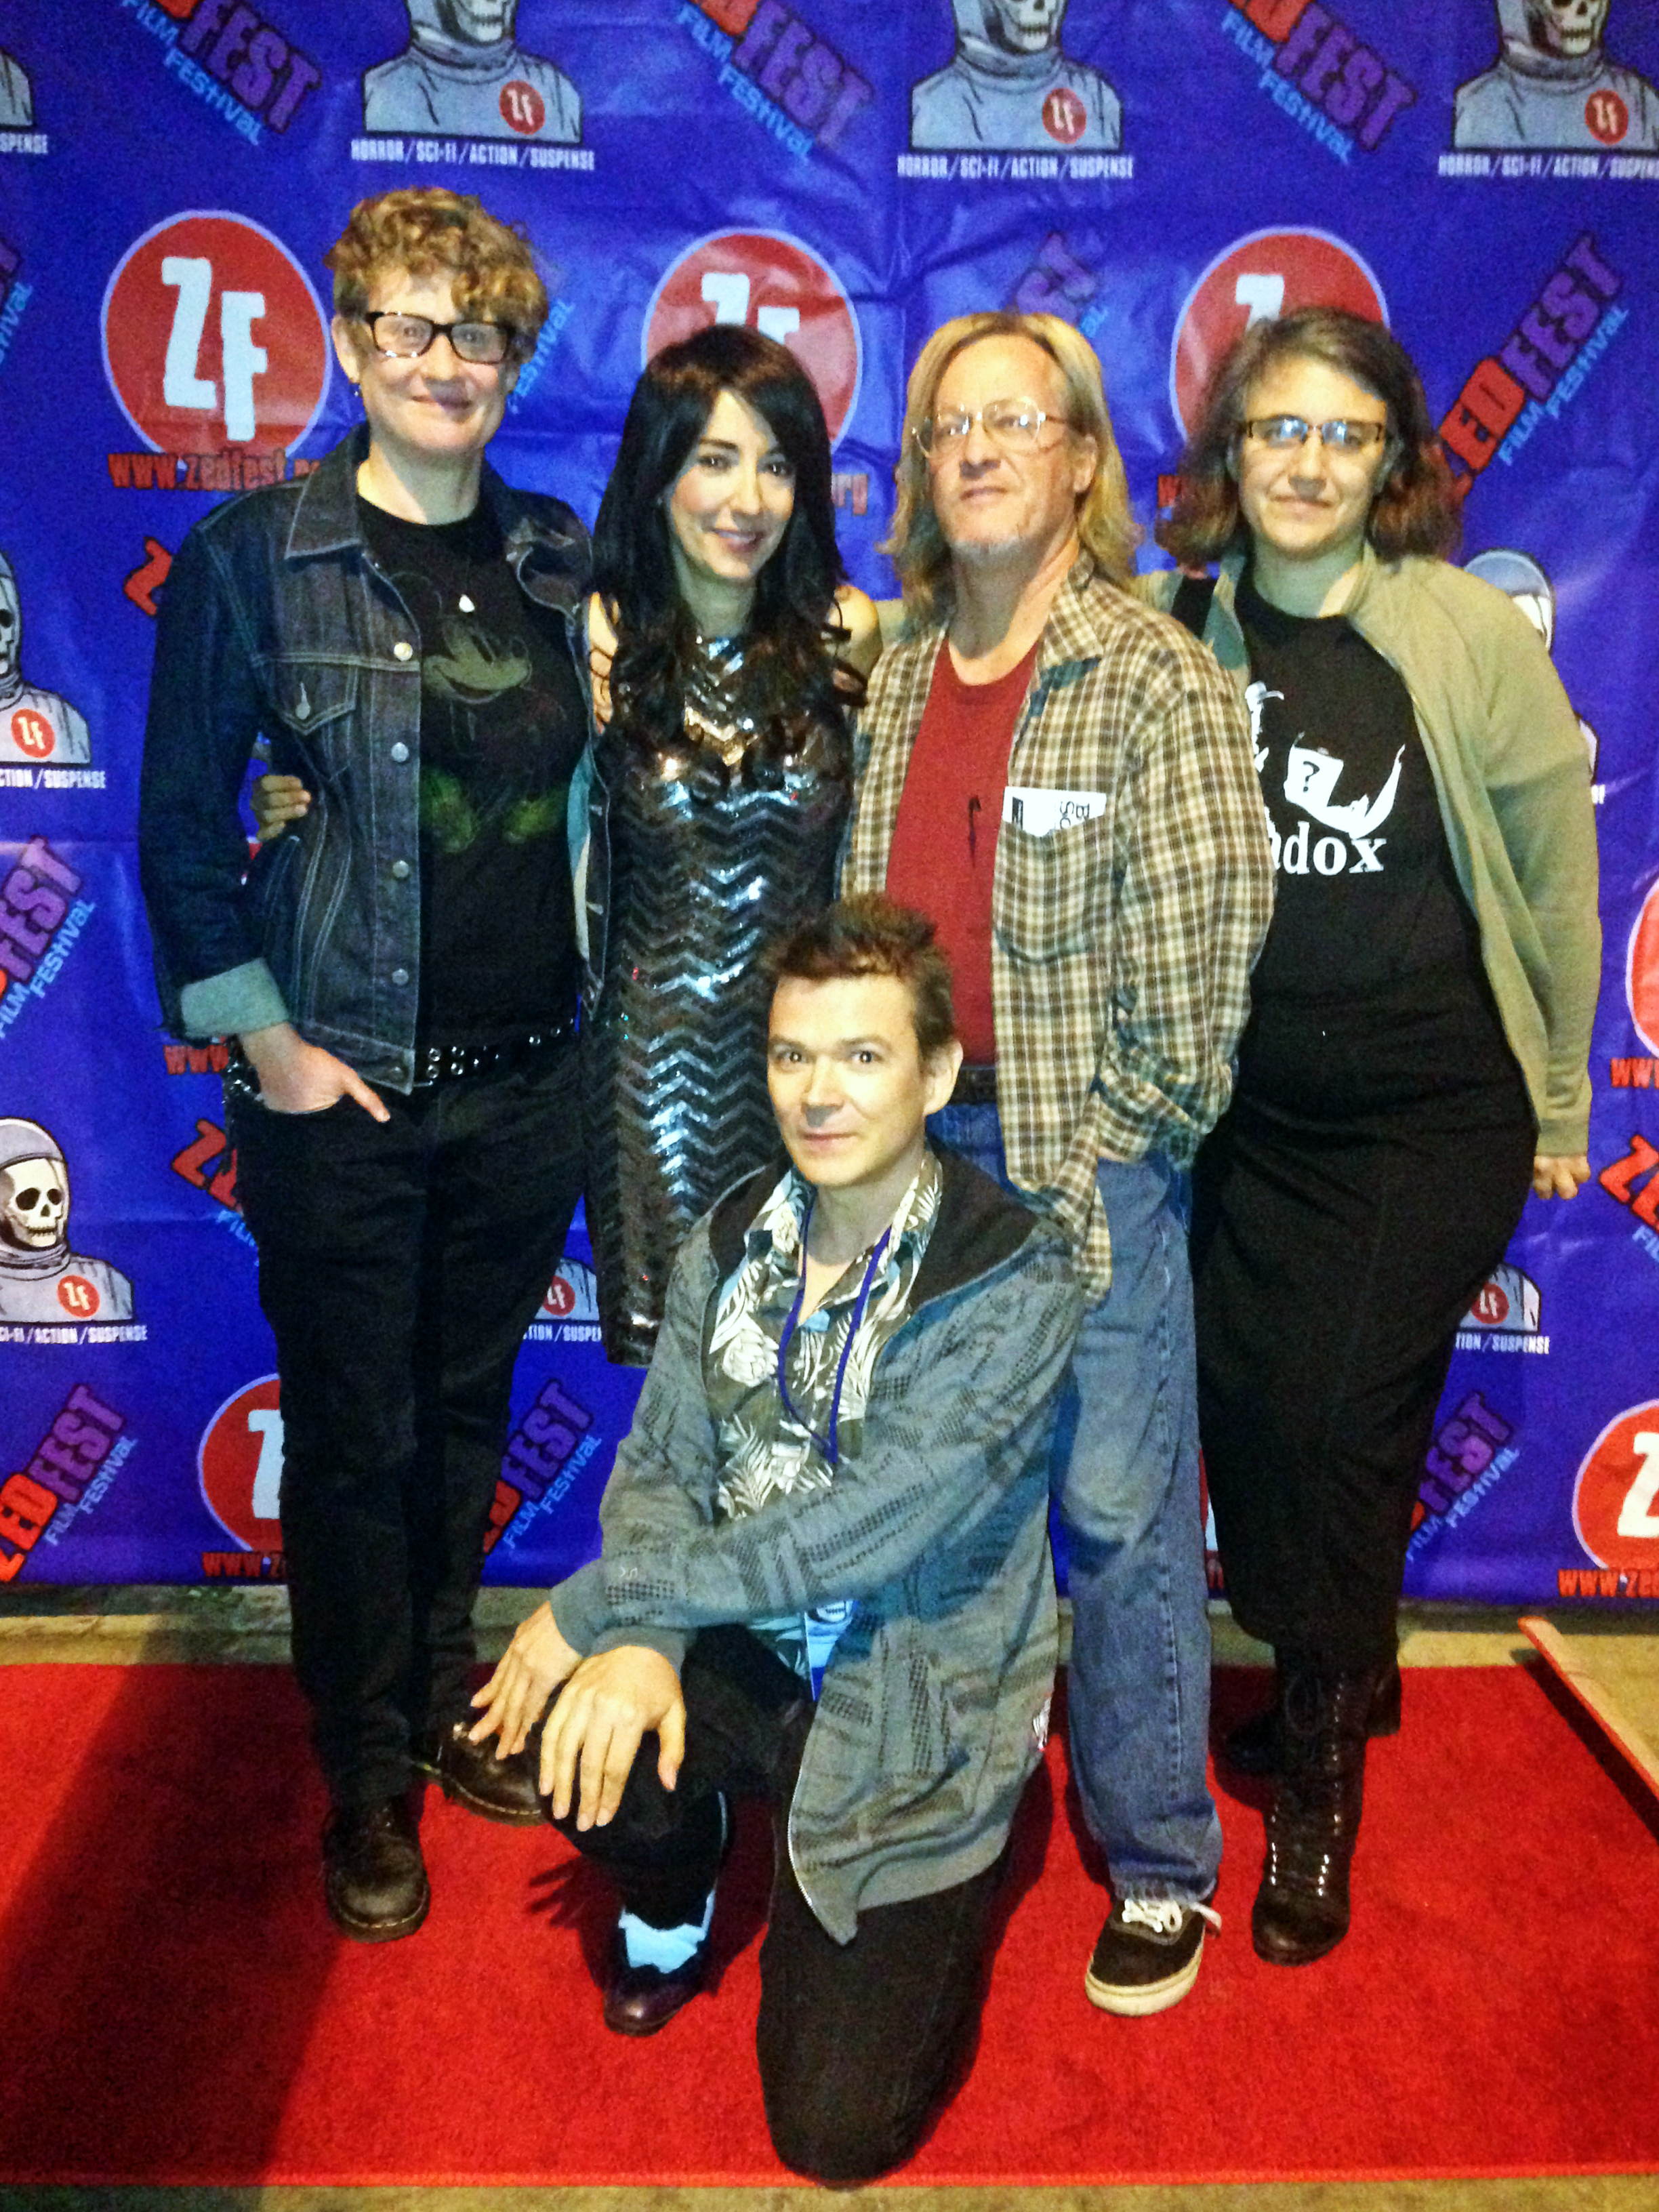 Luciana Lagana and other winners of Zed Fest Film Festival Best Ensemble Cast award at the premiere of Omadox in Burbank, CA on 12/14/14.